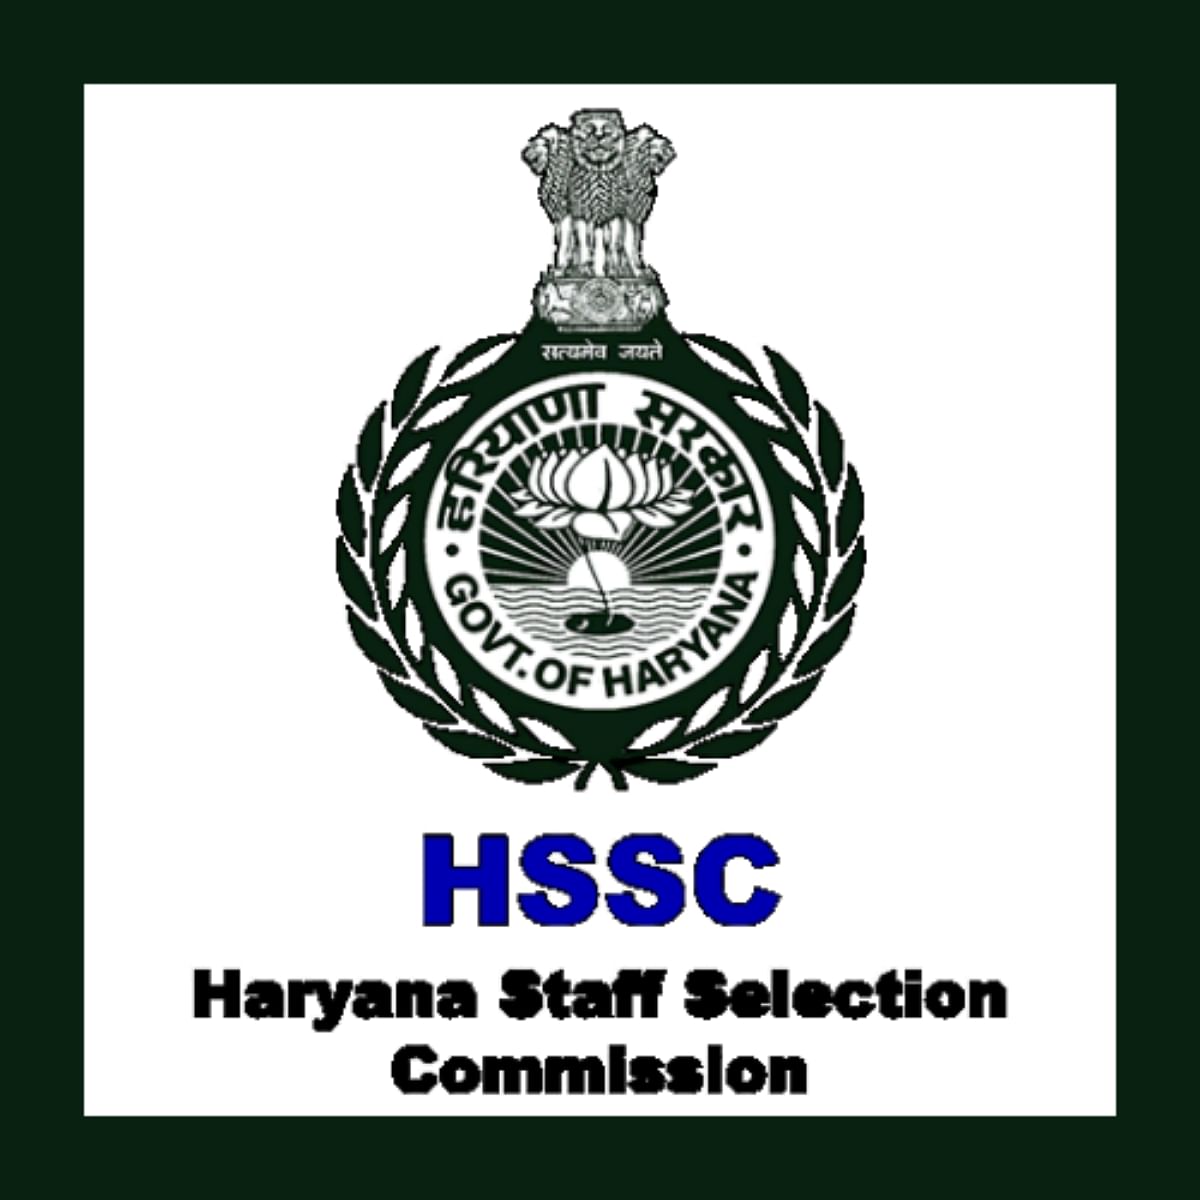 HSSC Constable Recruitment 2021: Last 2 days left to apply for 520 vacancies, check eligibility criteria and job details here